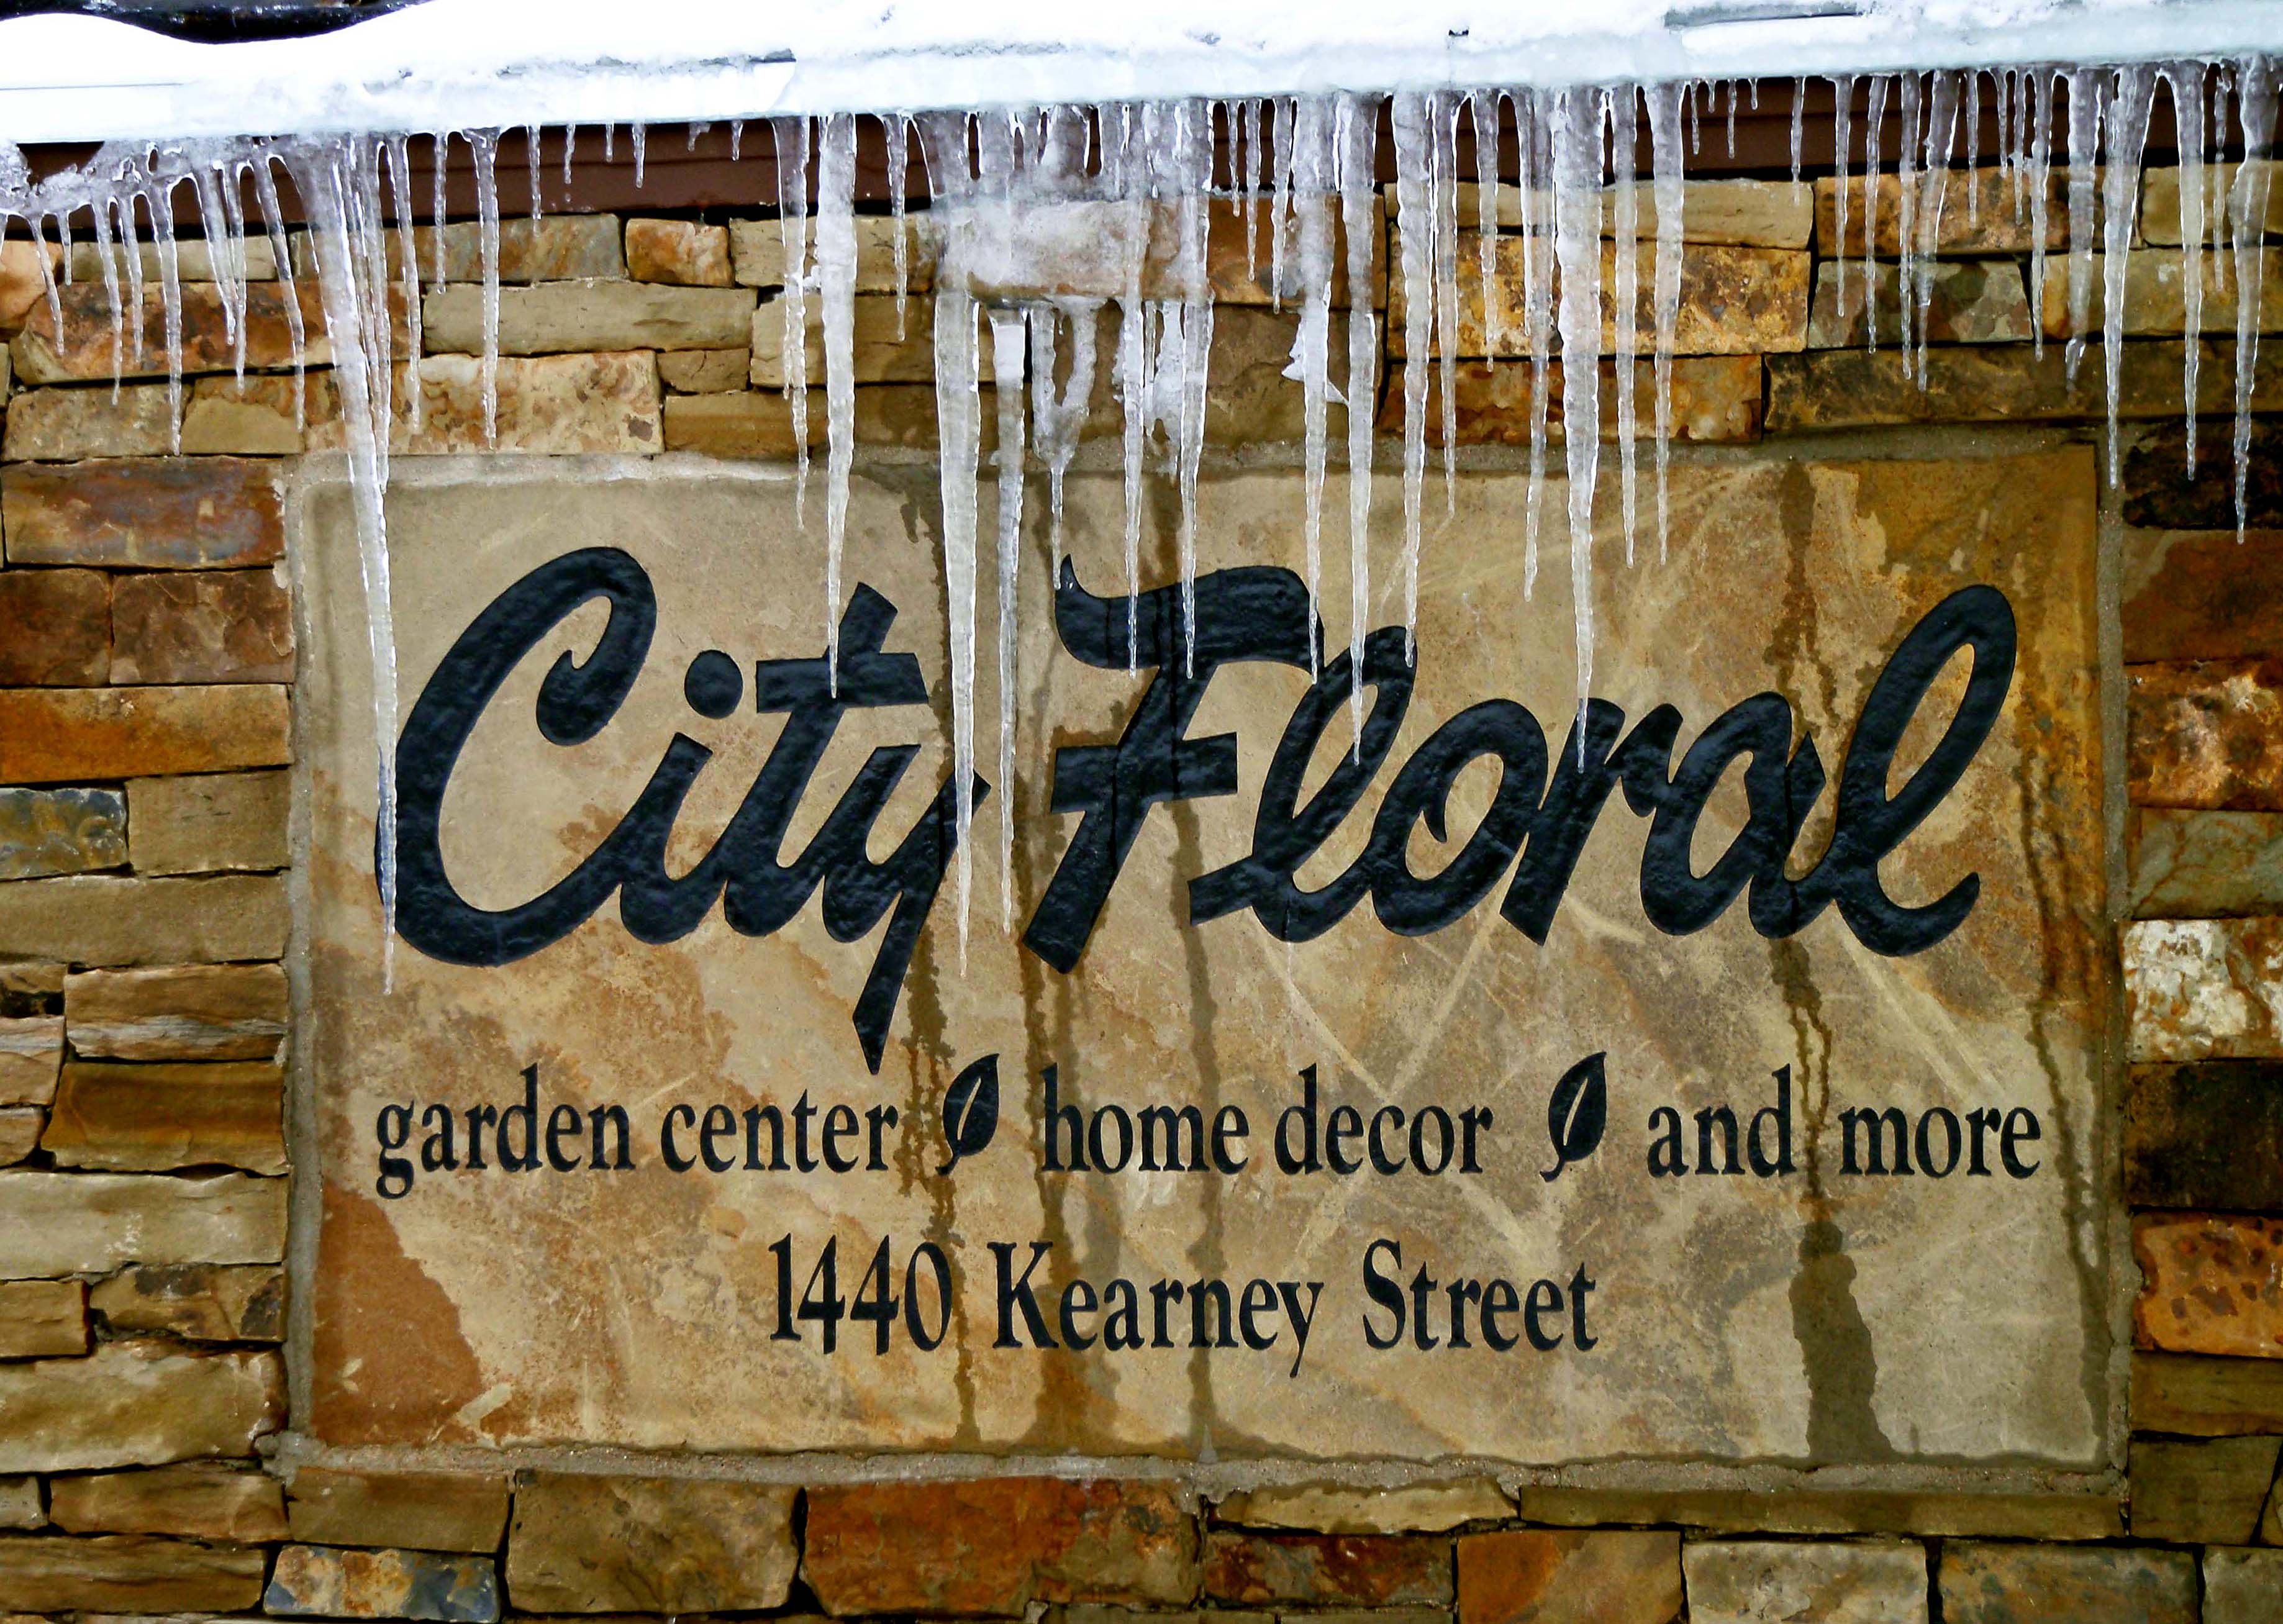 City Floral Garden Center, located at 1440 Kearney Street, is home to one of the largest, fresh-cut Christmas tree lots in the Denver area.